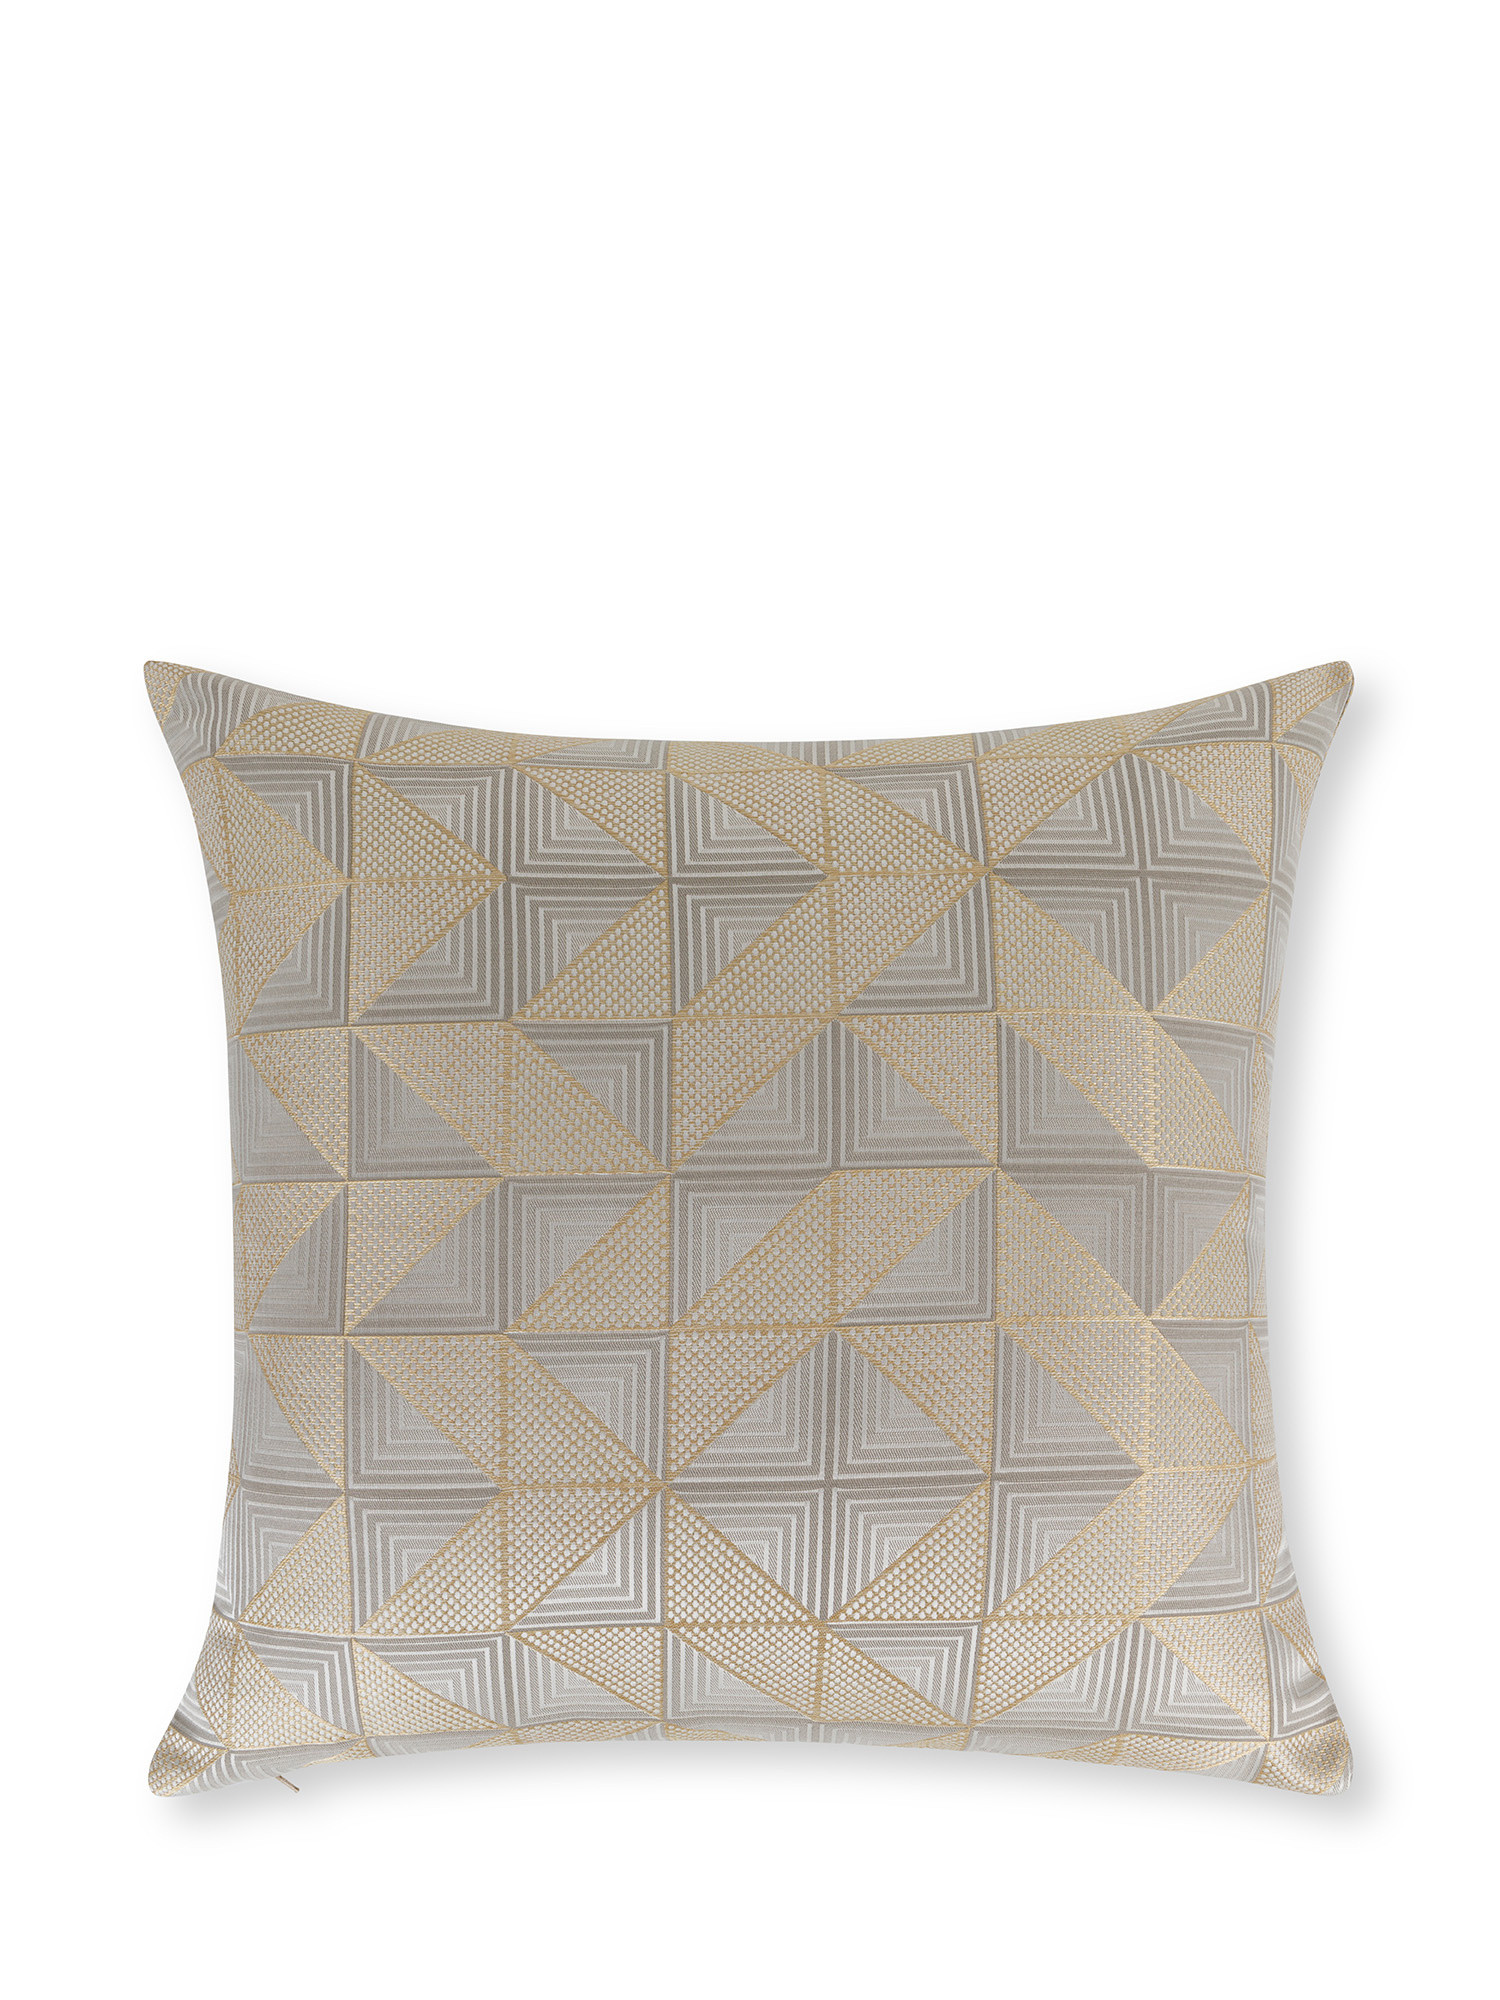 Cushion in jacquard fabric with geometric pattern 45x45 cm, Silver Grey, large